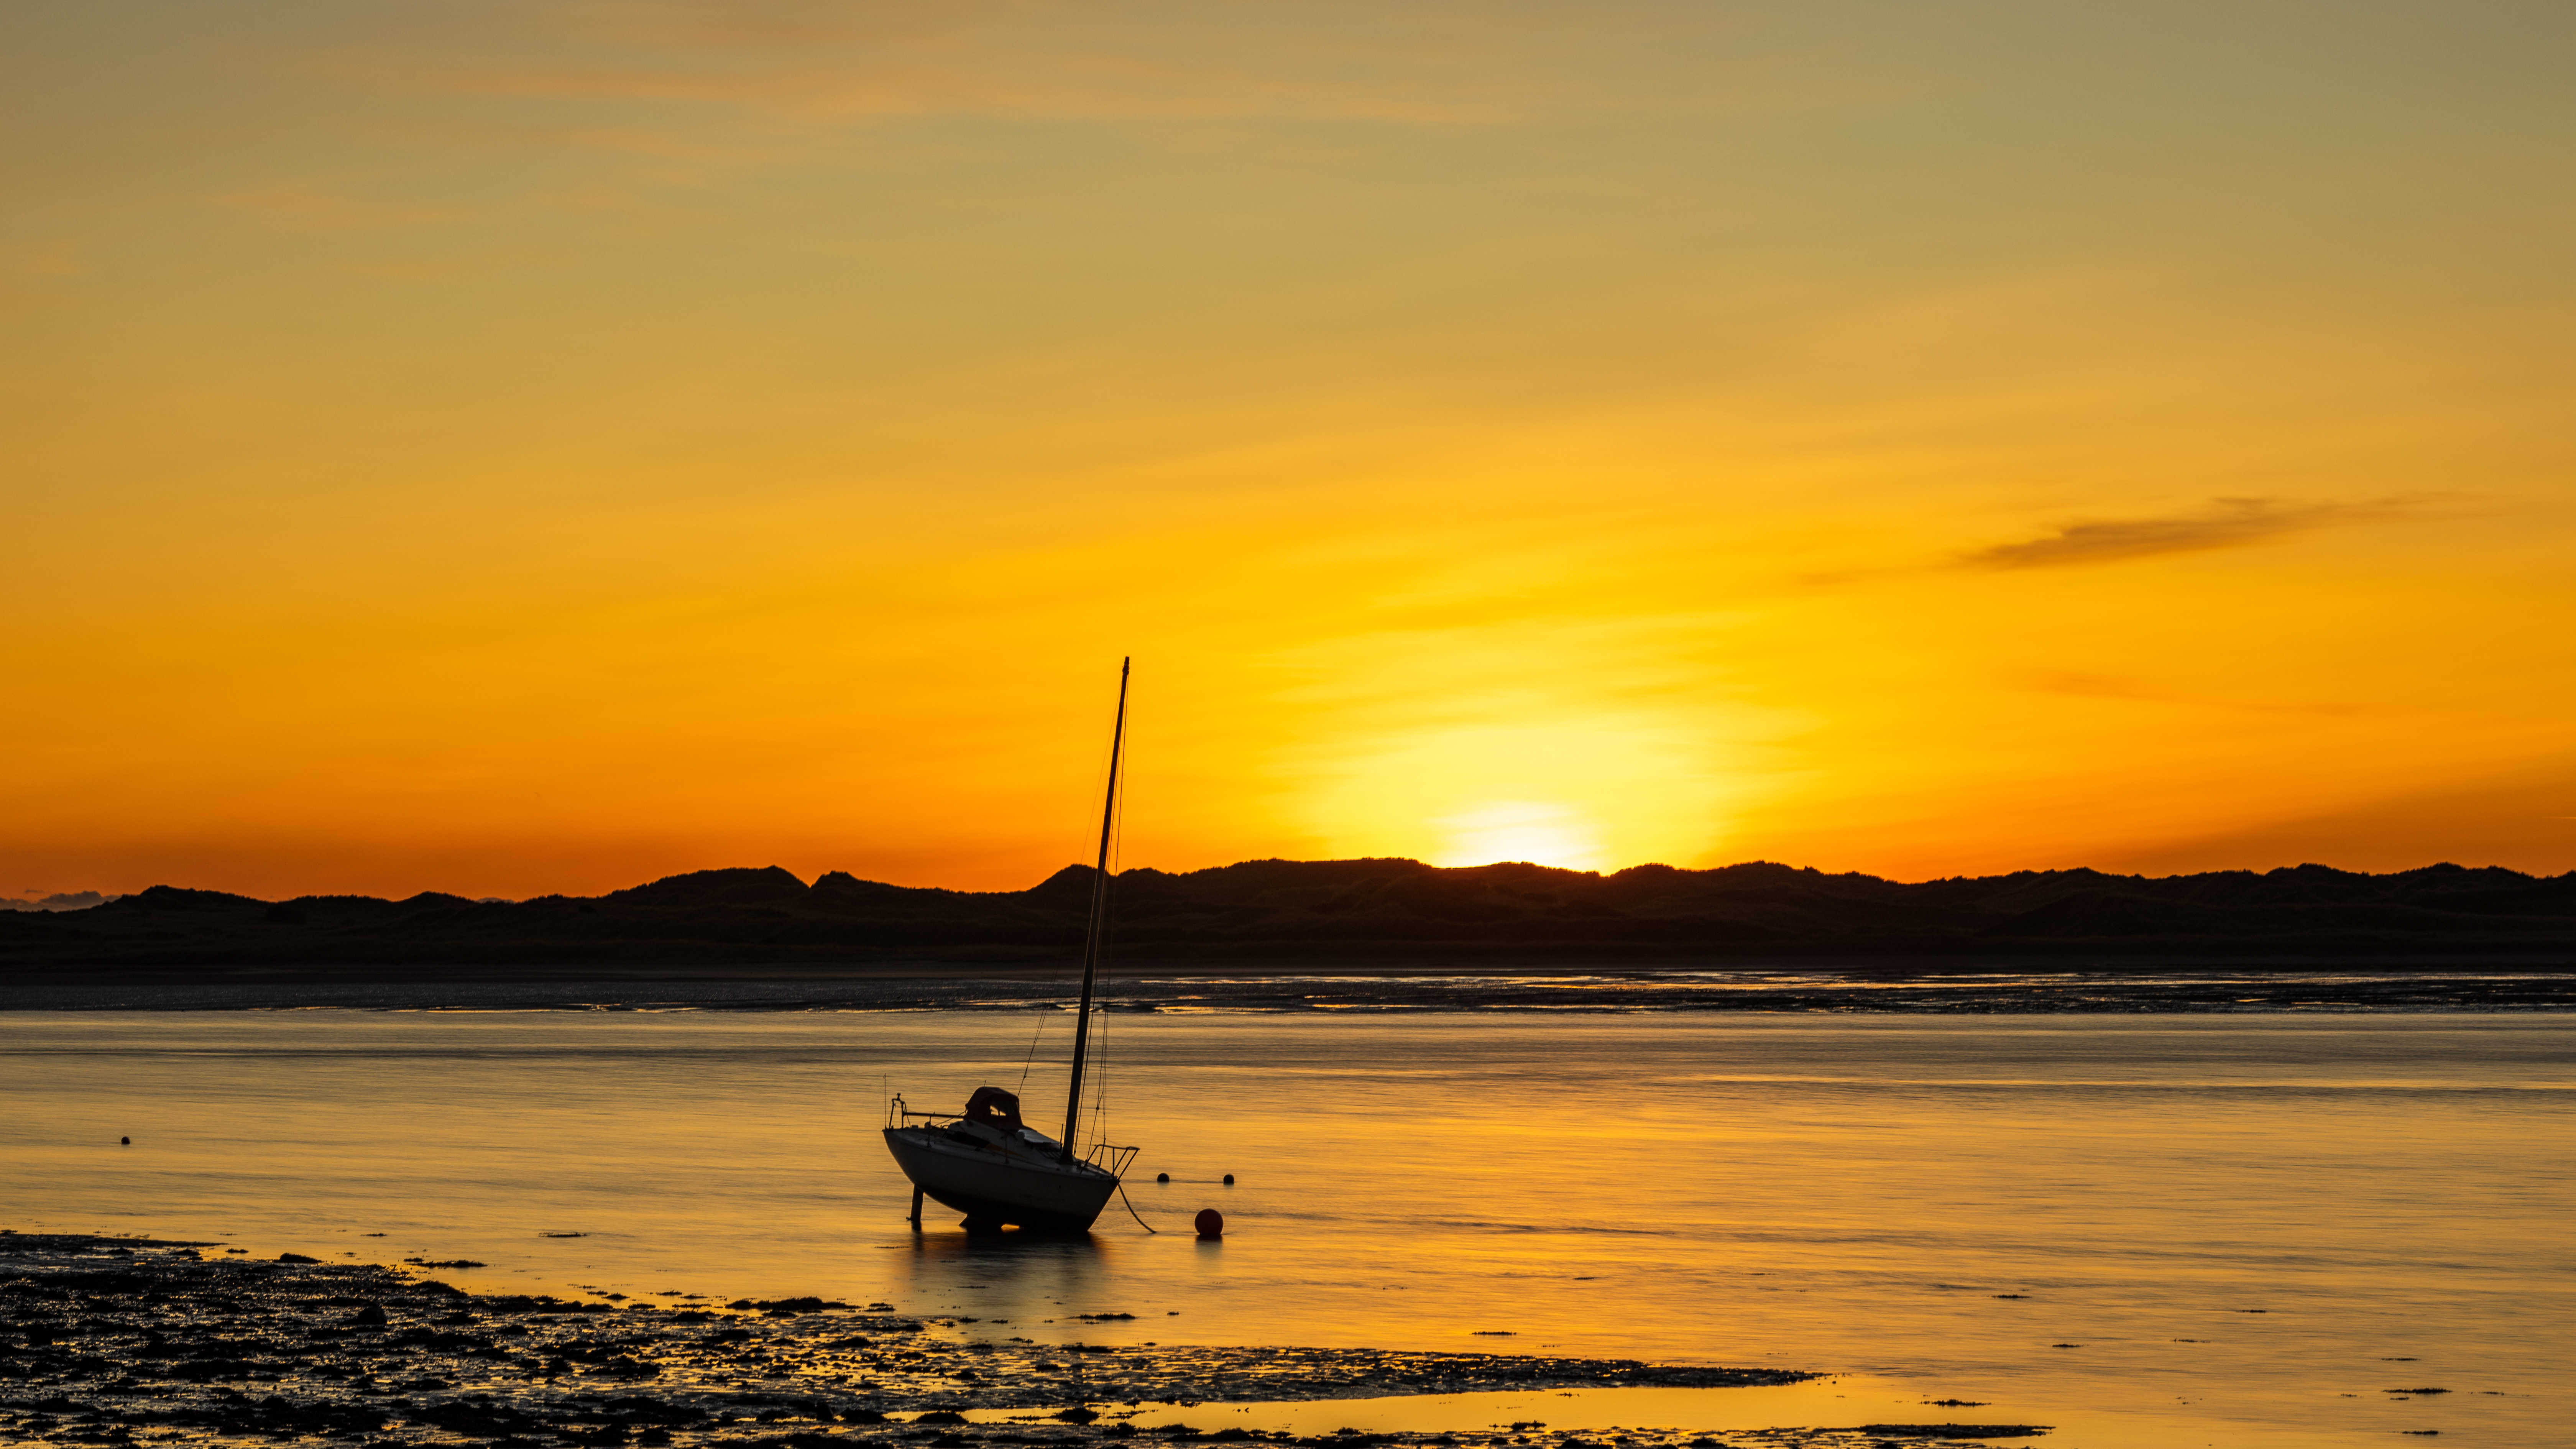 Sunset at Ravenglass beach, with the last rays of sunshine shedding light over the sea and one singular boat resting on the shoreline